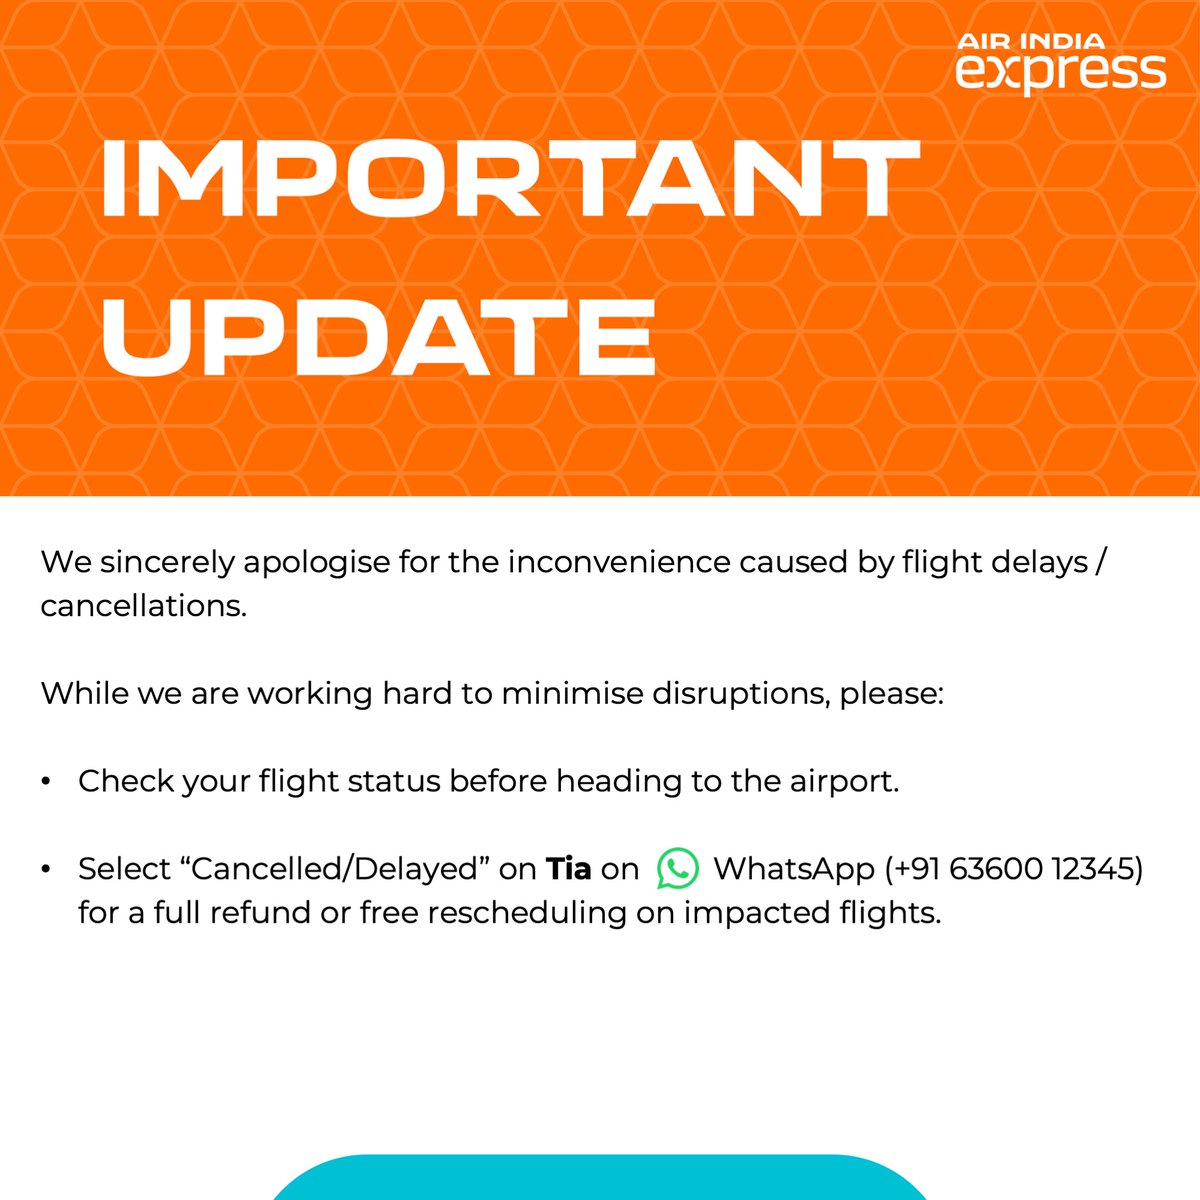 #ImportantUpdate

We sincerely apologise for the inconvenience caused by unprecedented flight delays and cancellations. While we are working hard to minimise disruptions, please check your flight status before heading to the airport. If your flight is impacted, please reach out…